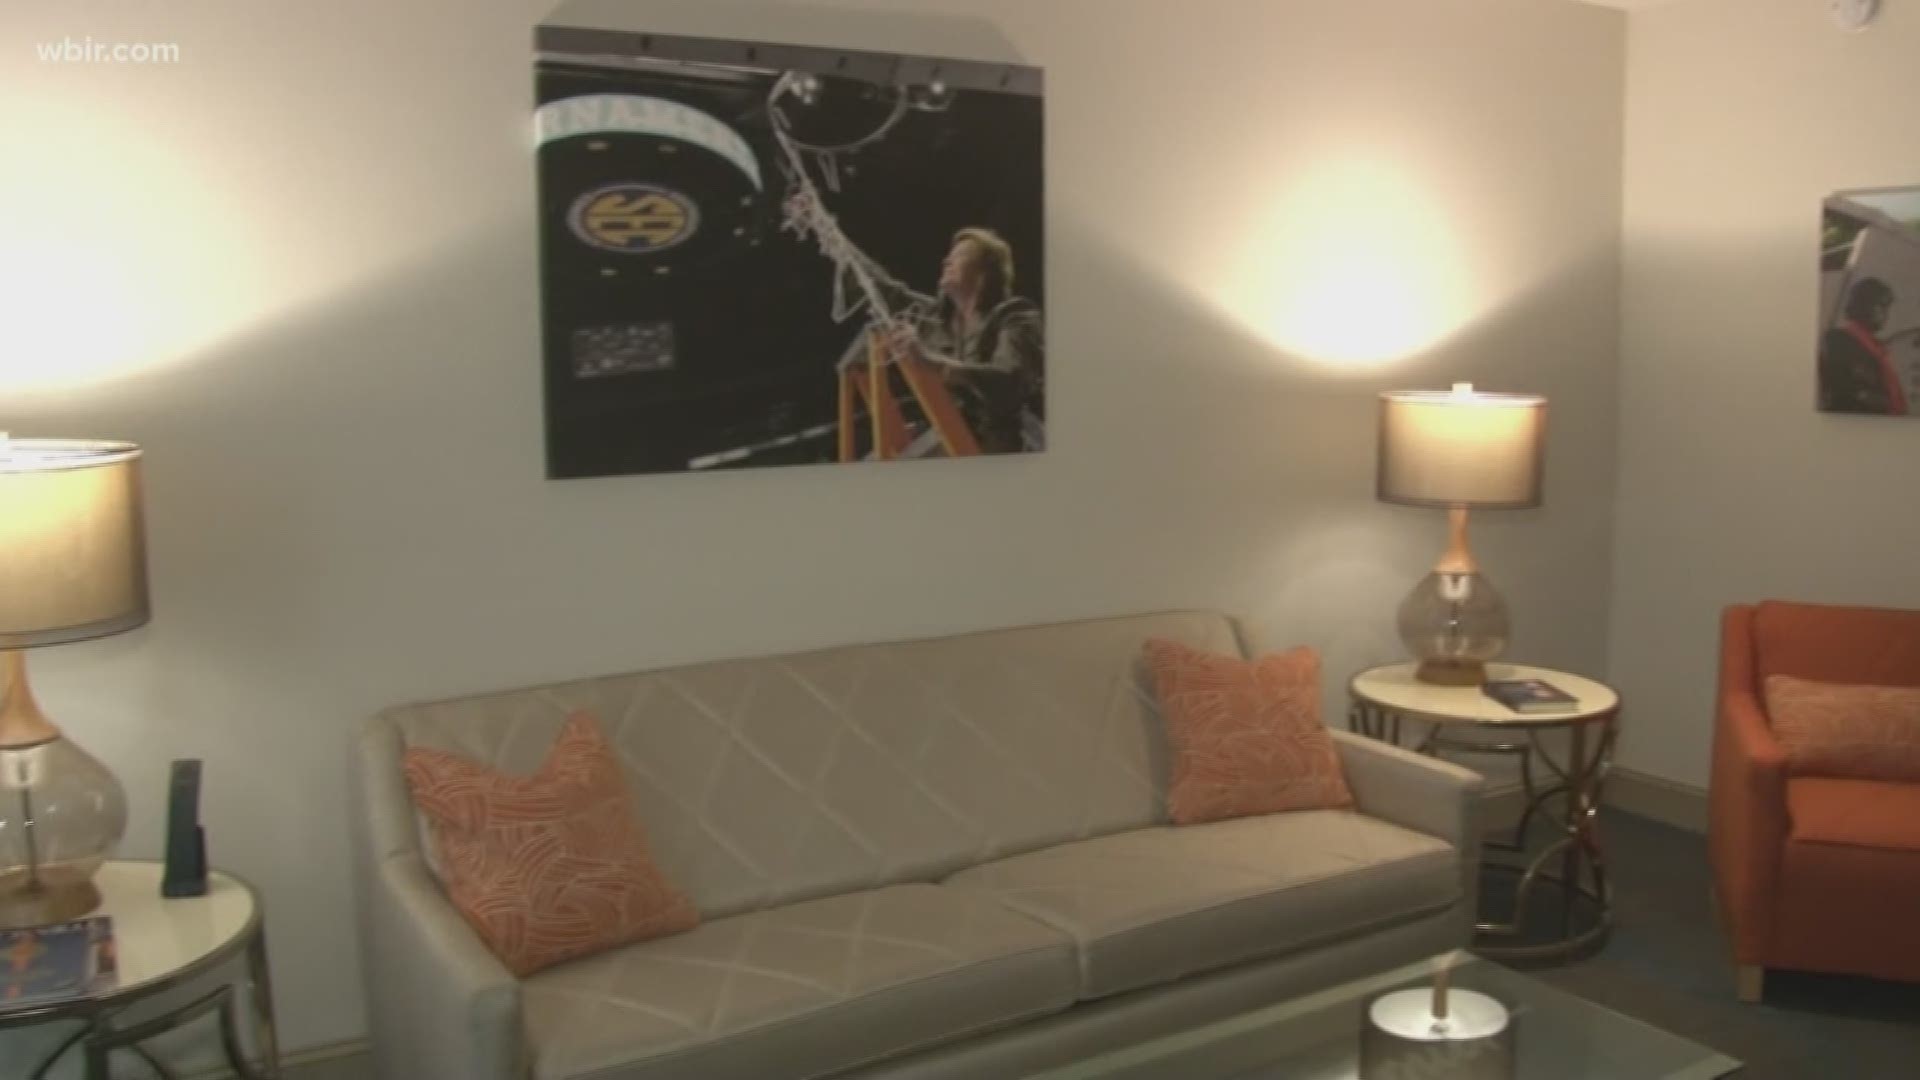 A portion of all room rates from this suite will be donated to the Pat Summitt Foundation.